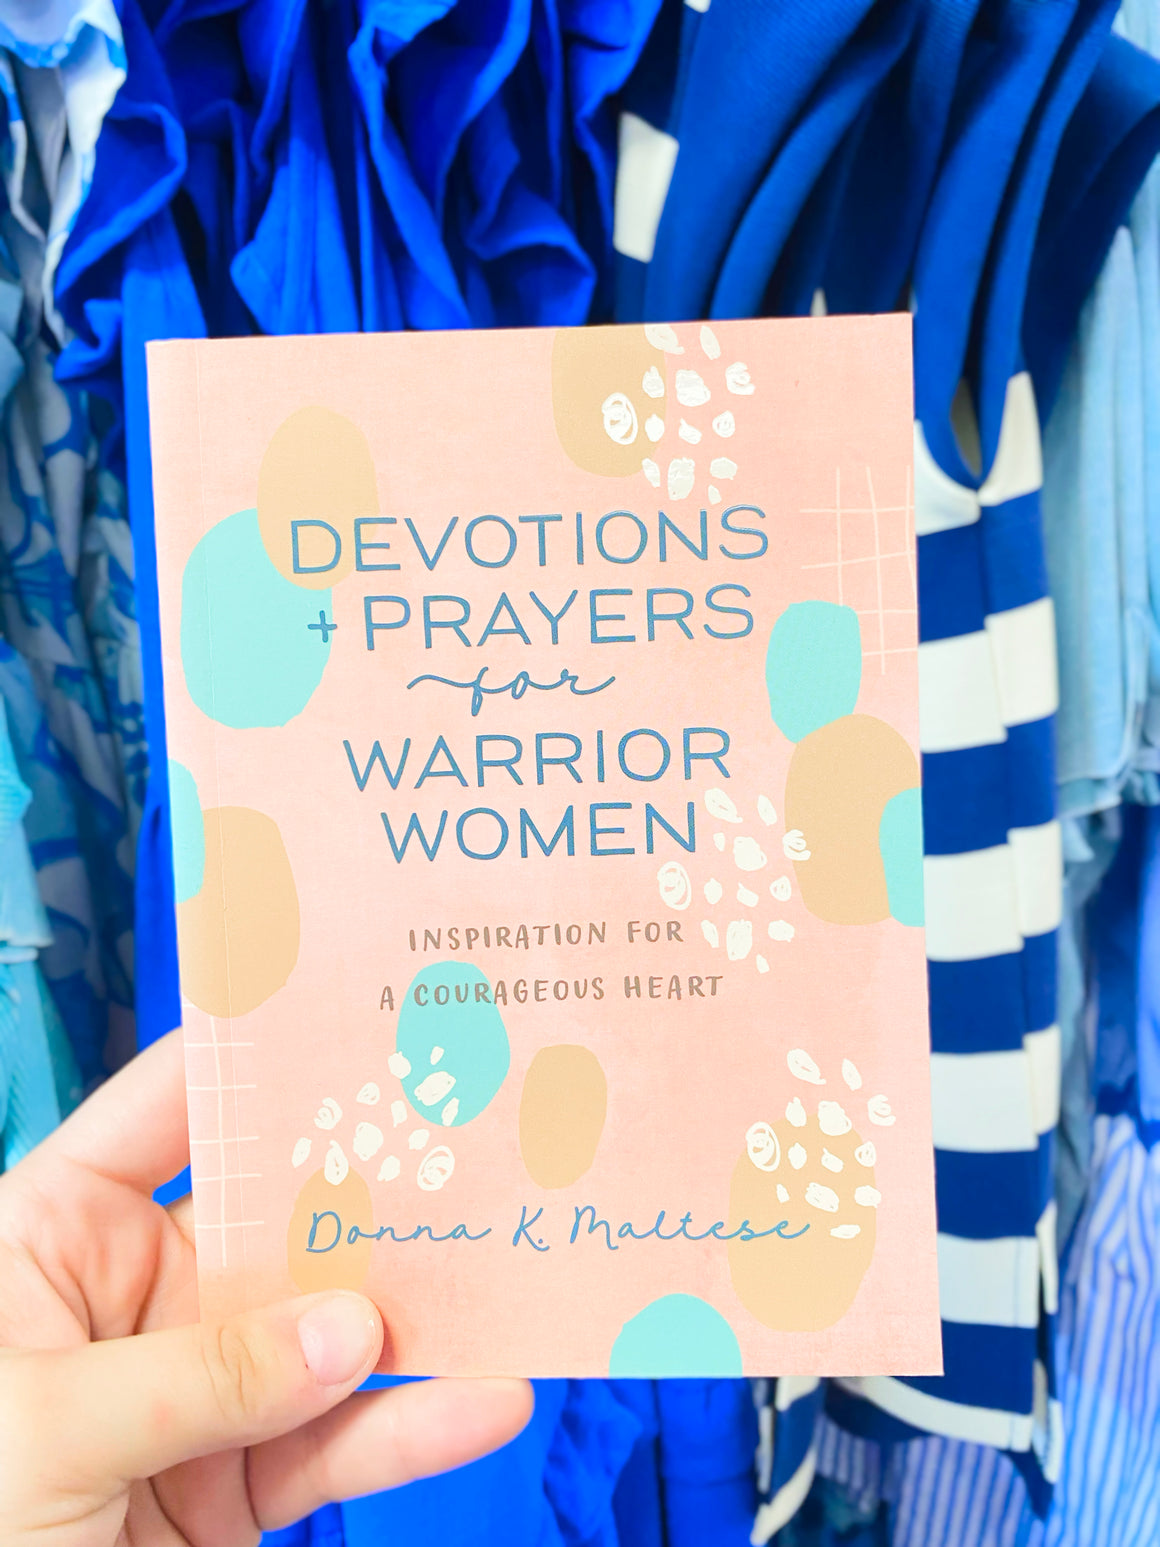 Devotions and Prayers for Warrior Women